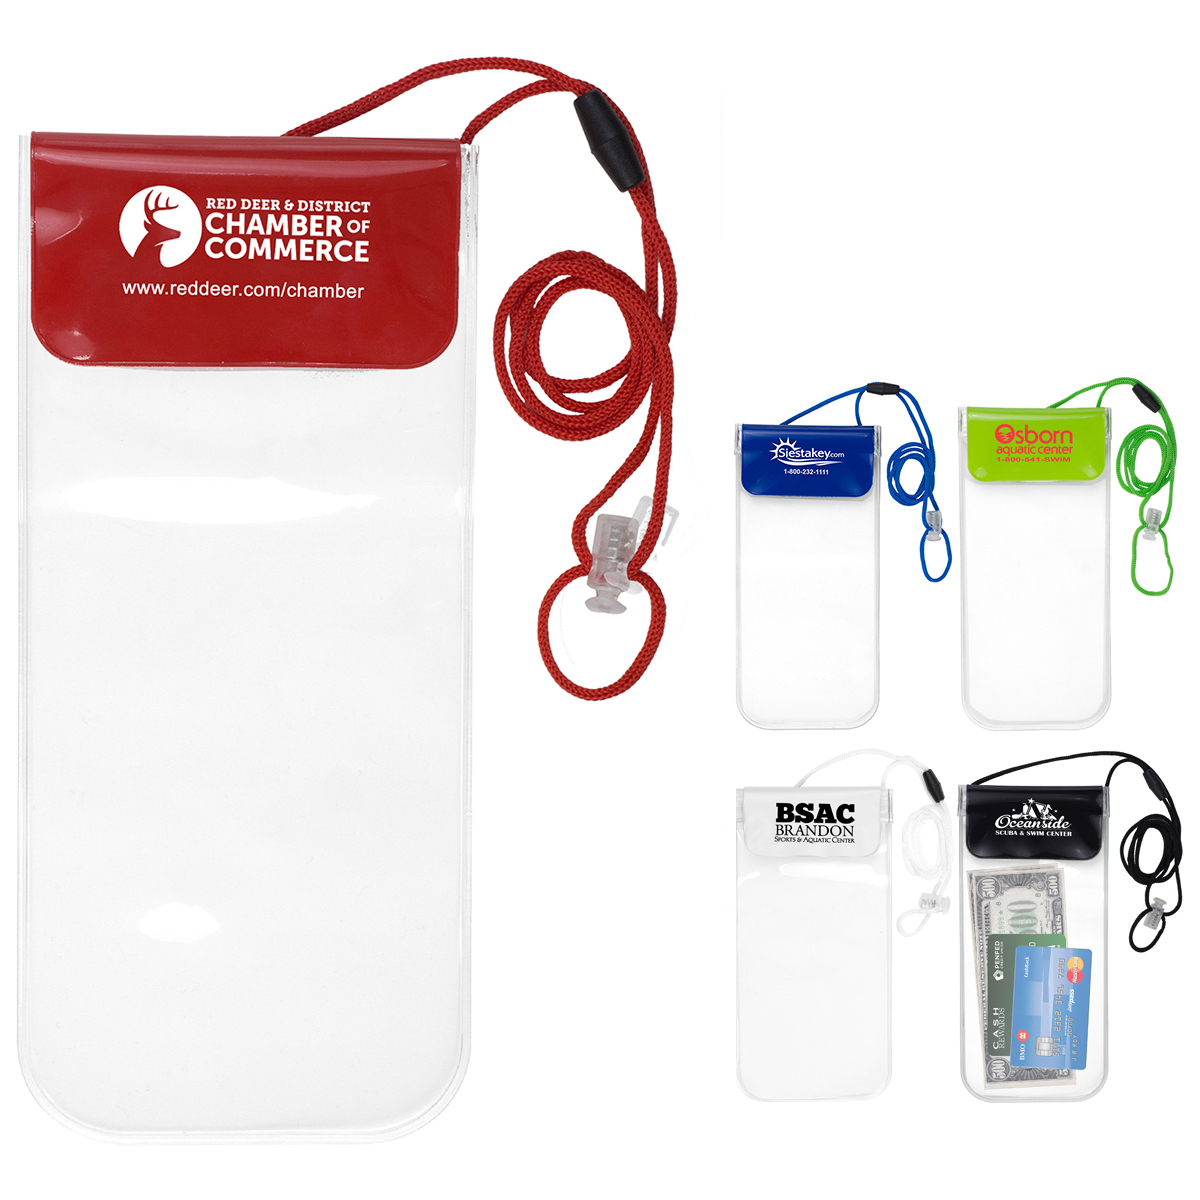 "TRUCKEE" Clear Touch Through Water-Resistant Cell Phone and Accessories Carrying Case with 35” Adjustable Breakaway Lanyard